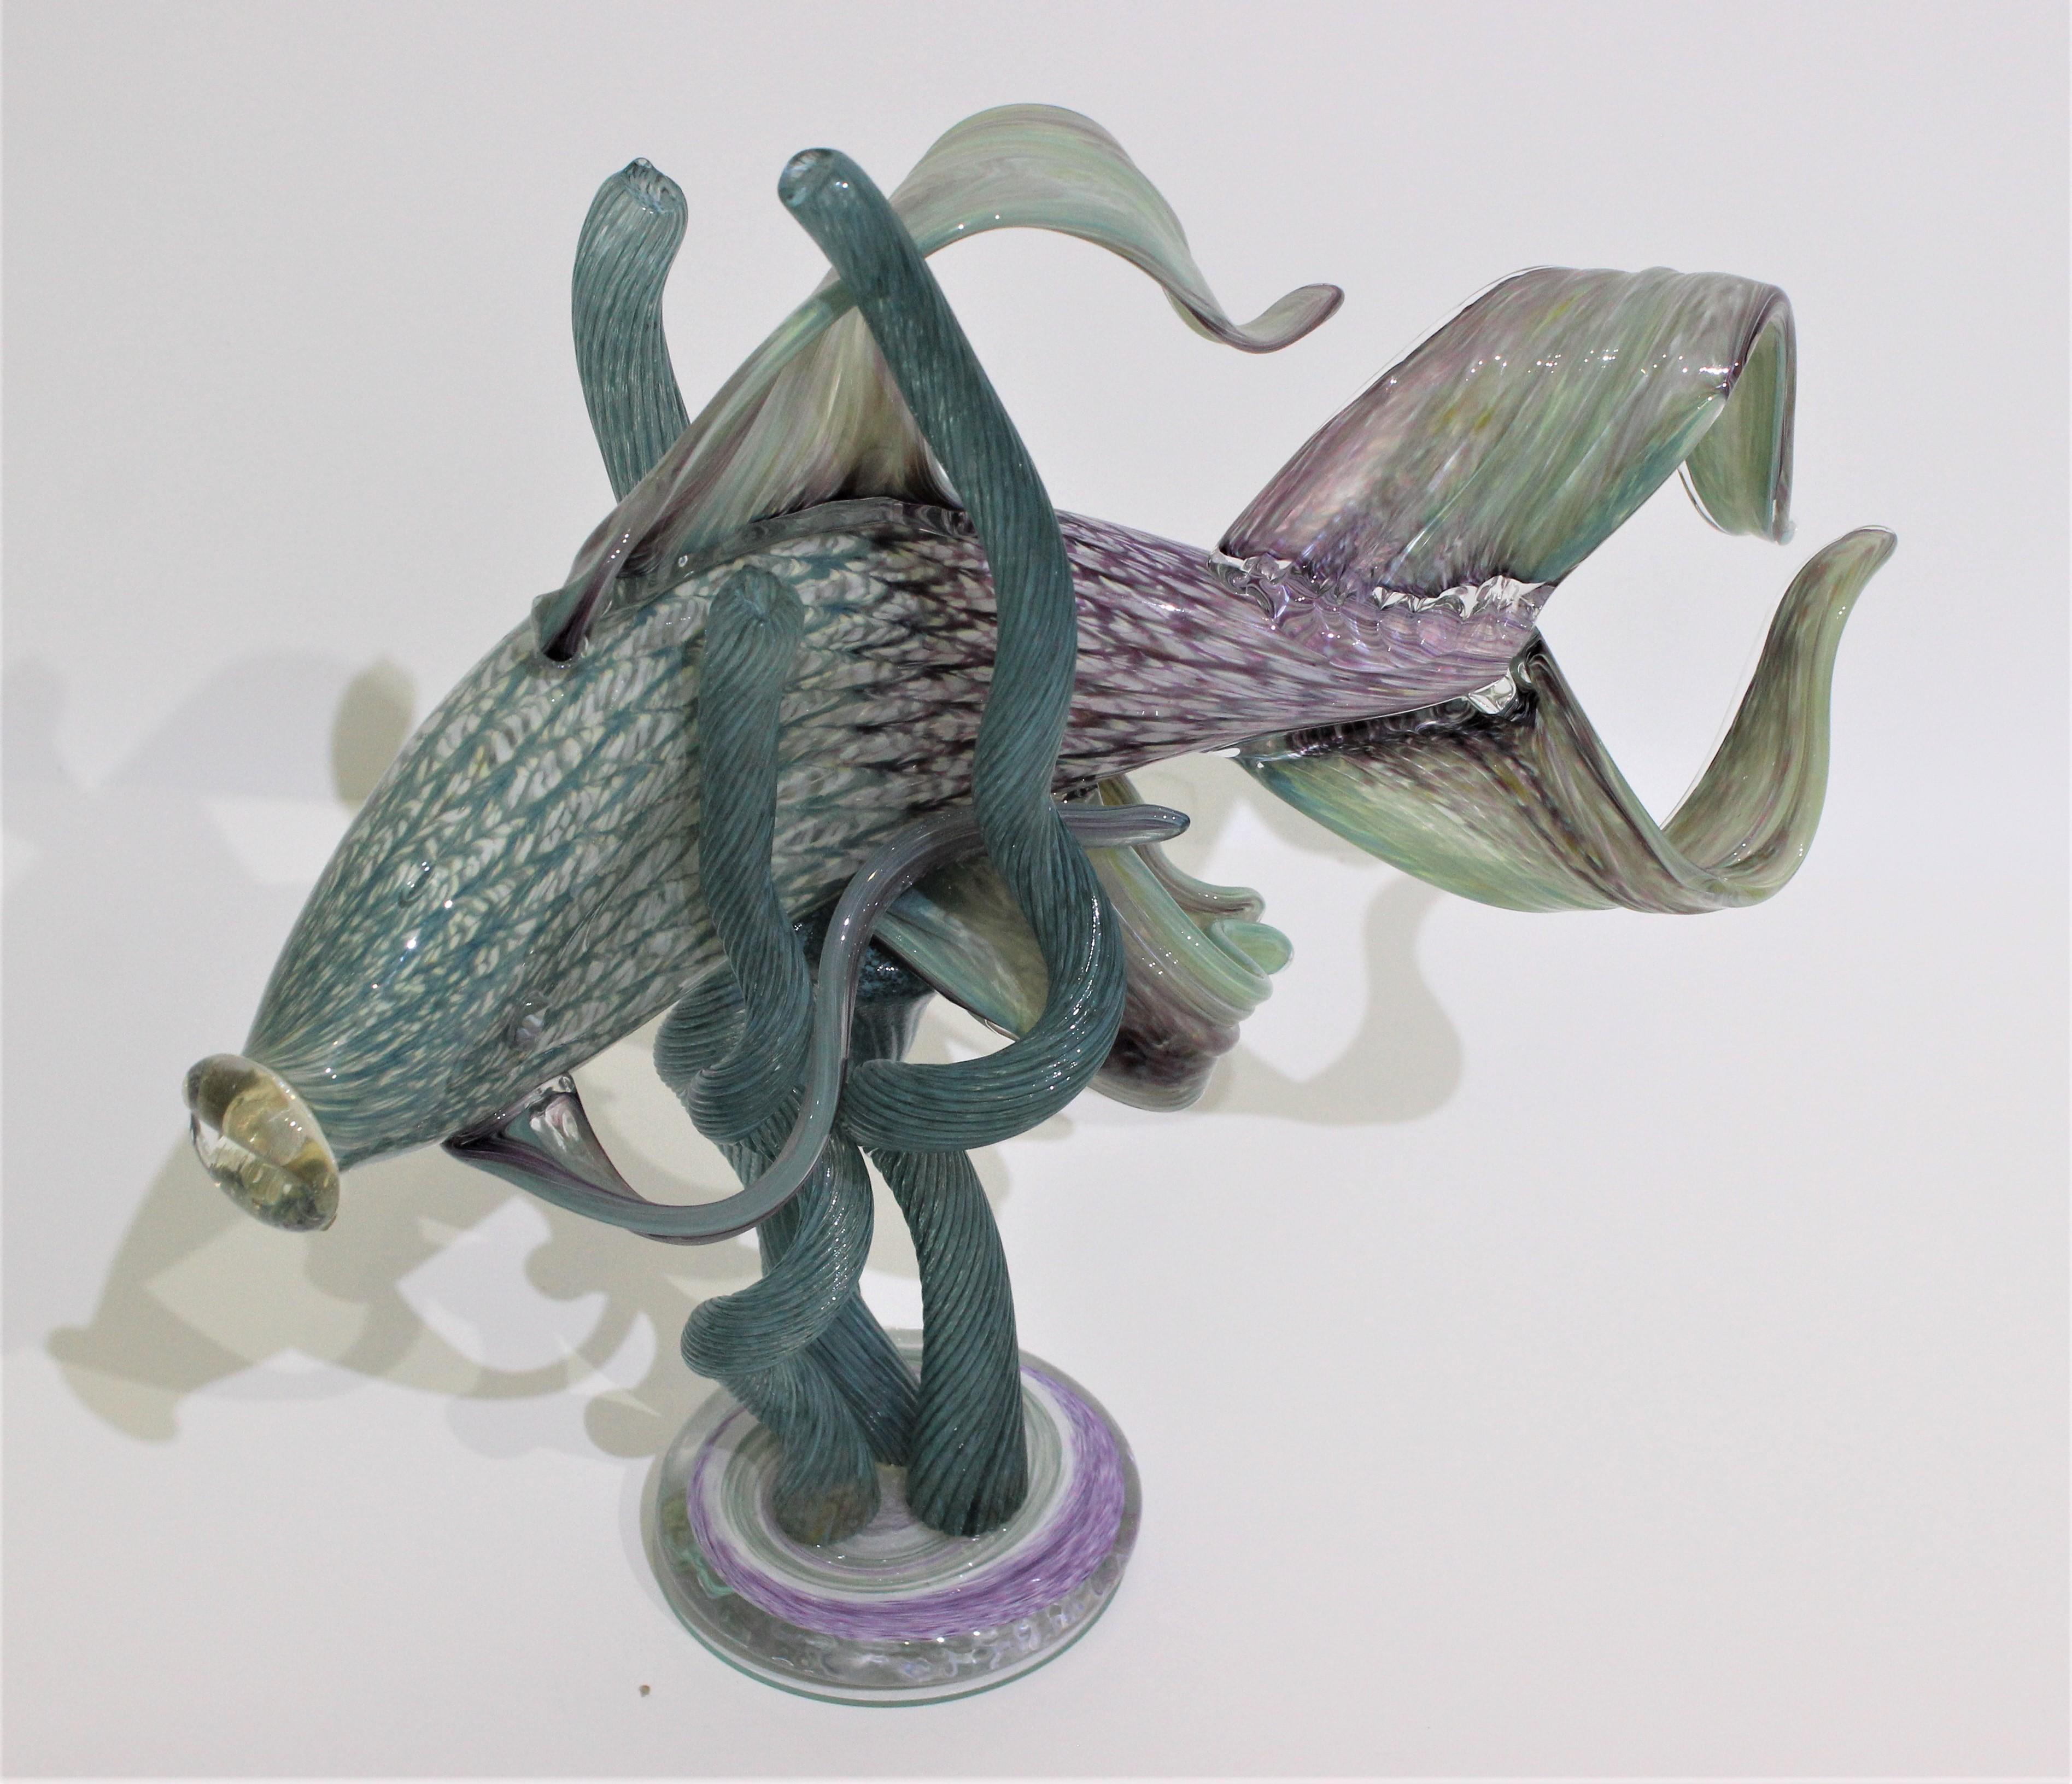 Vintage artisan glass sculpture of an exotic fish from a Palm Beach estate.